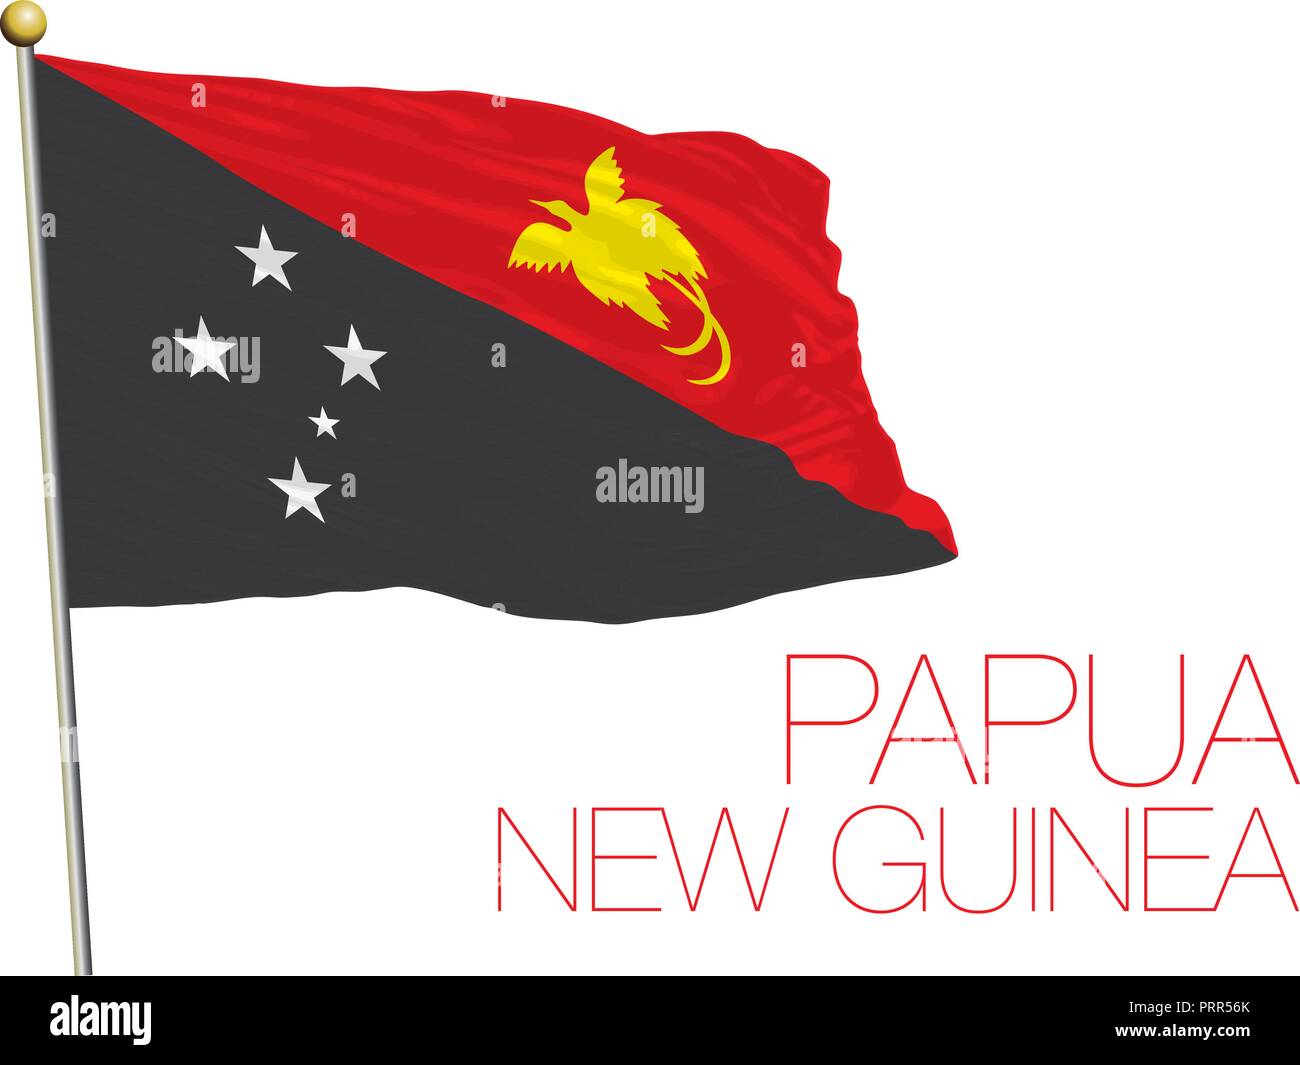 Papua New Guinea official flag, vector illustration Stock Vector